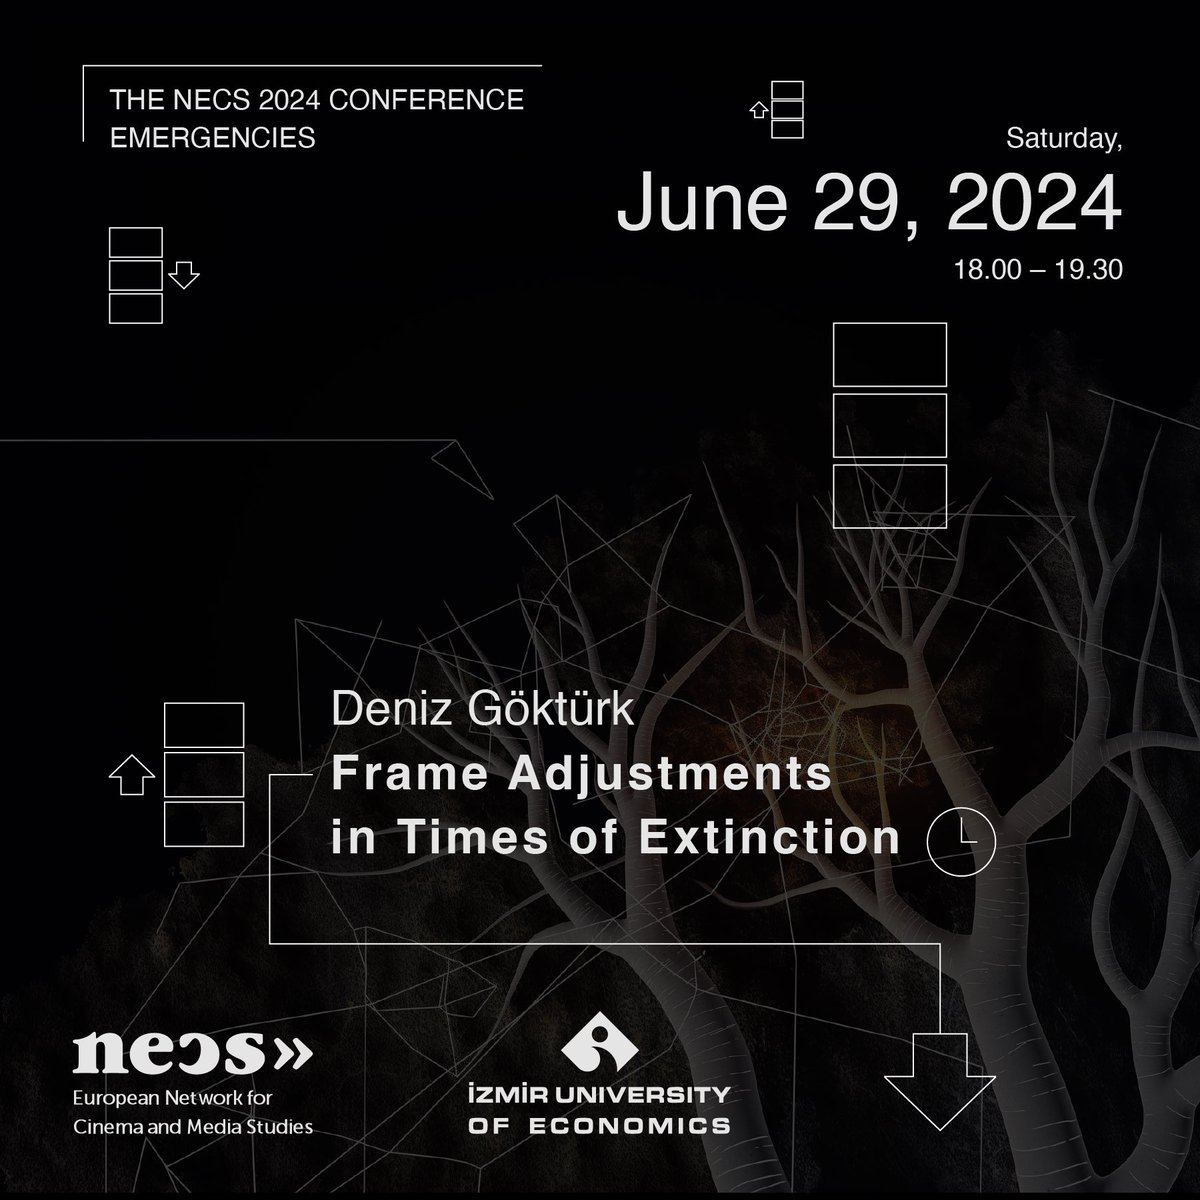 On the last day of the #NECS2024 in #Izmir, Deniz Göktürk is going to give a speech on ‘Frame Adjustments in Times of Extinction.